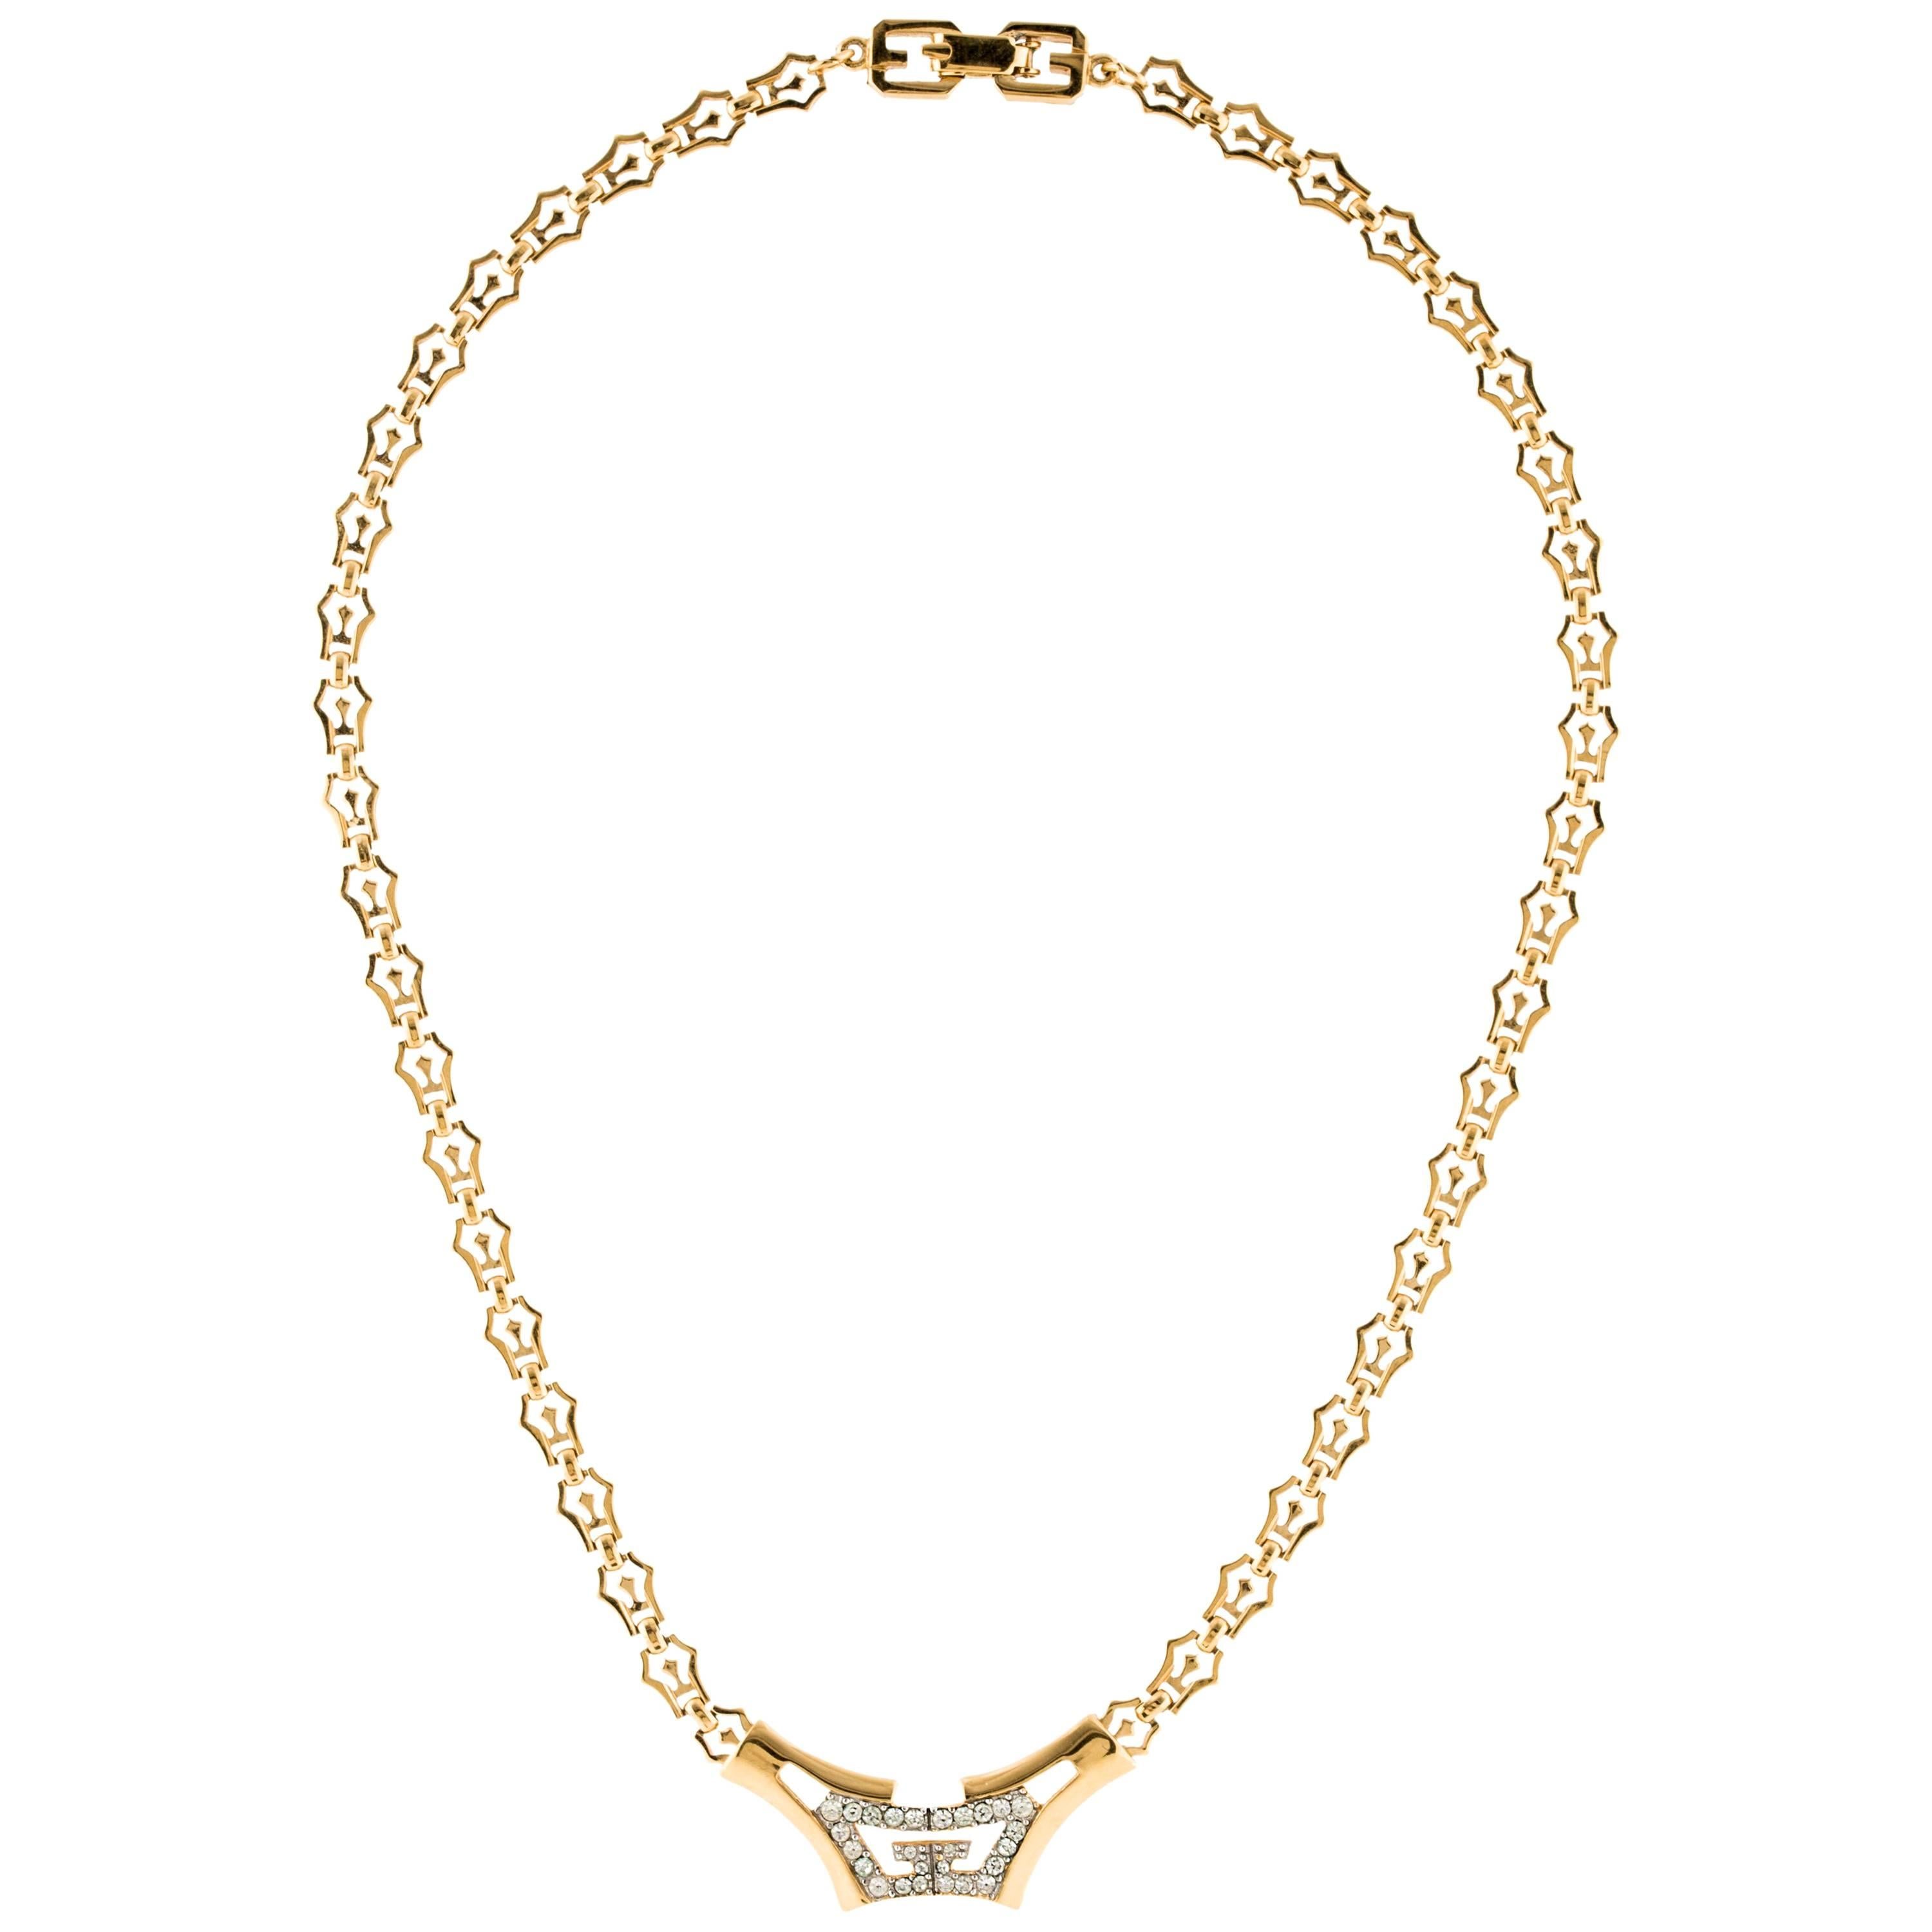 Givenchy Gold Chain GG Charm Pendant Crystal Choker Chain Evening Necklace